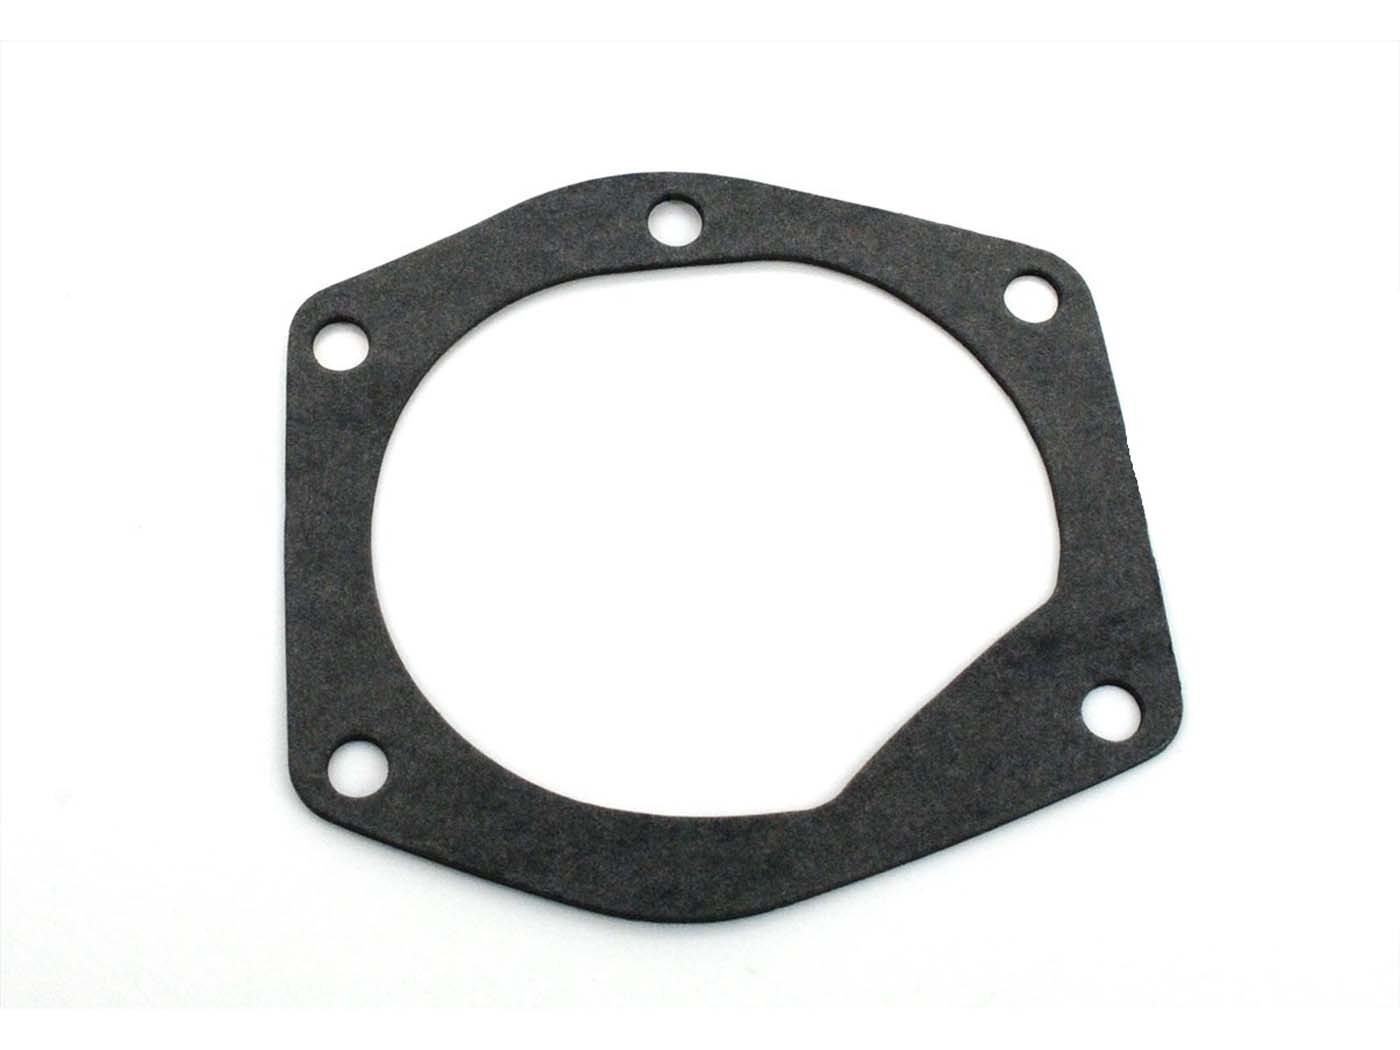 Clutch Cover Gasket For Hercules Prima M, DKW, Rixe, KTM